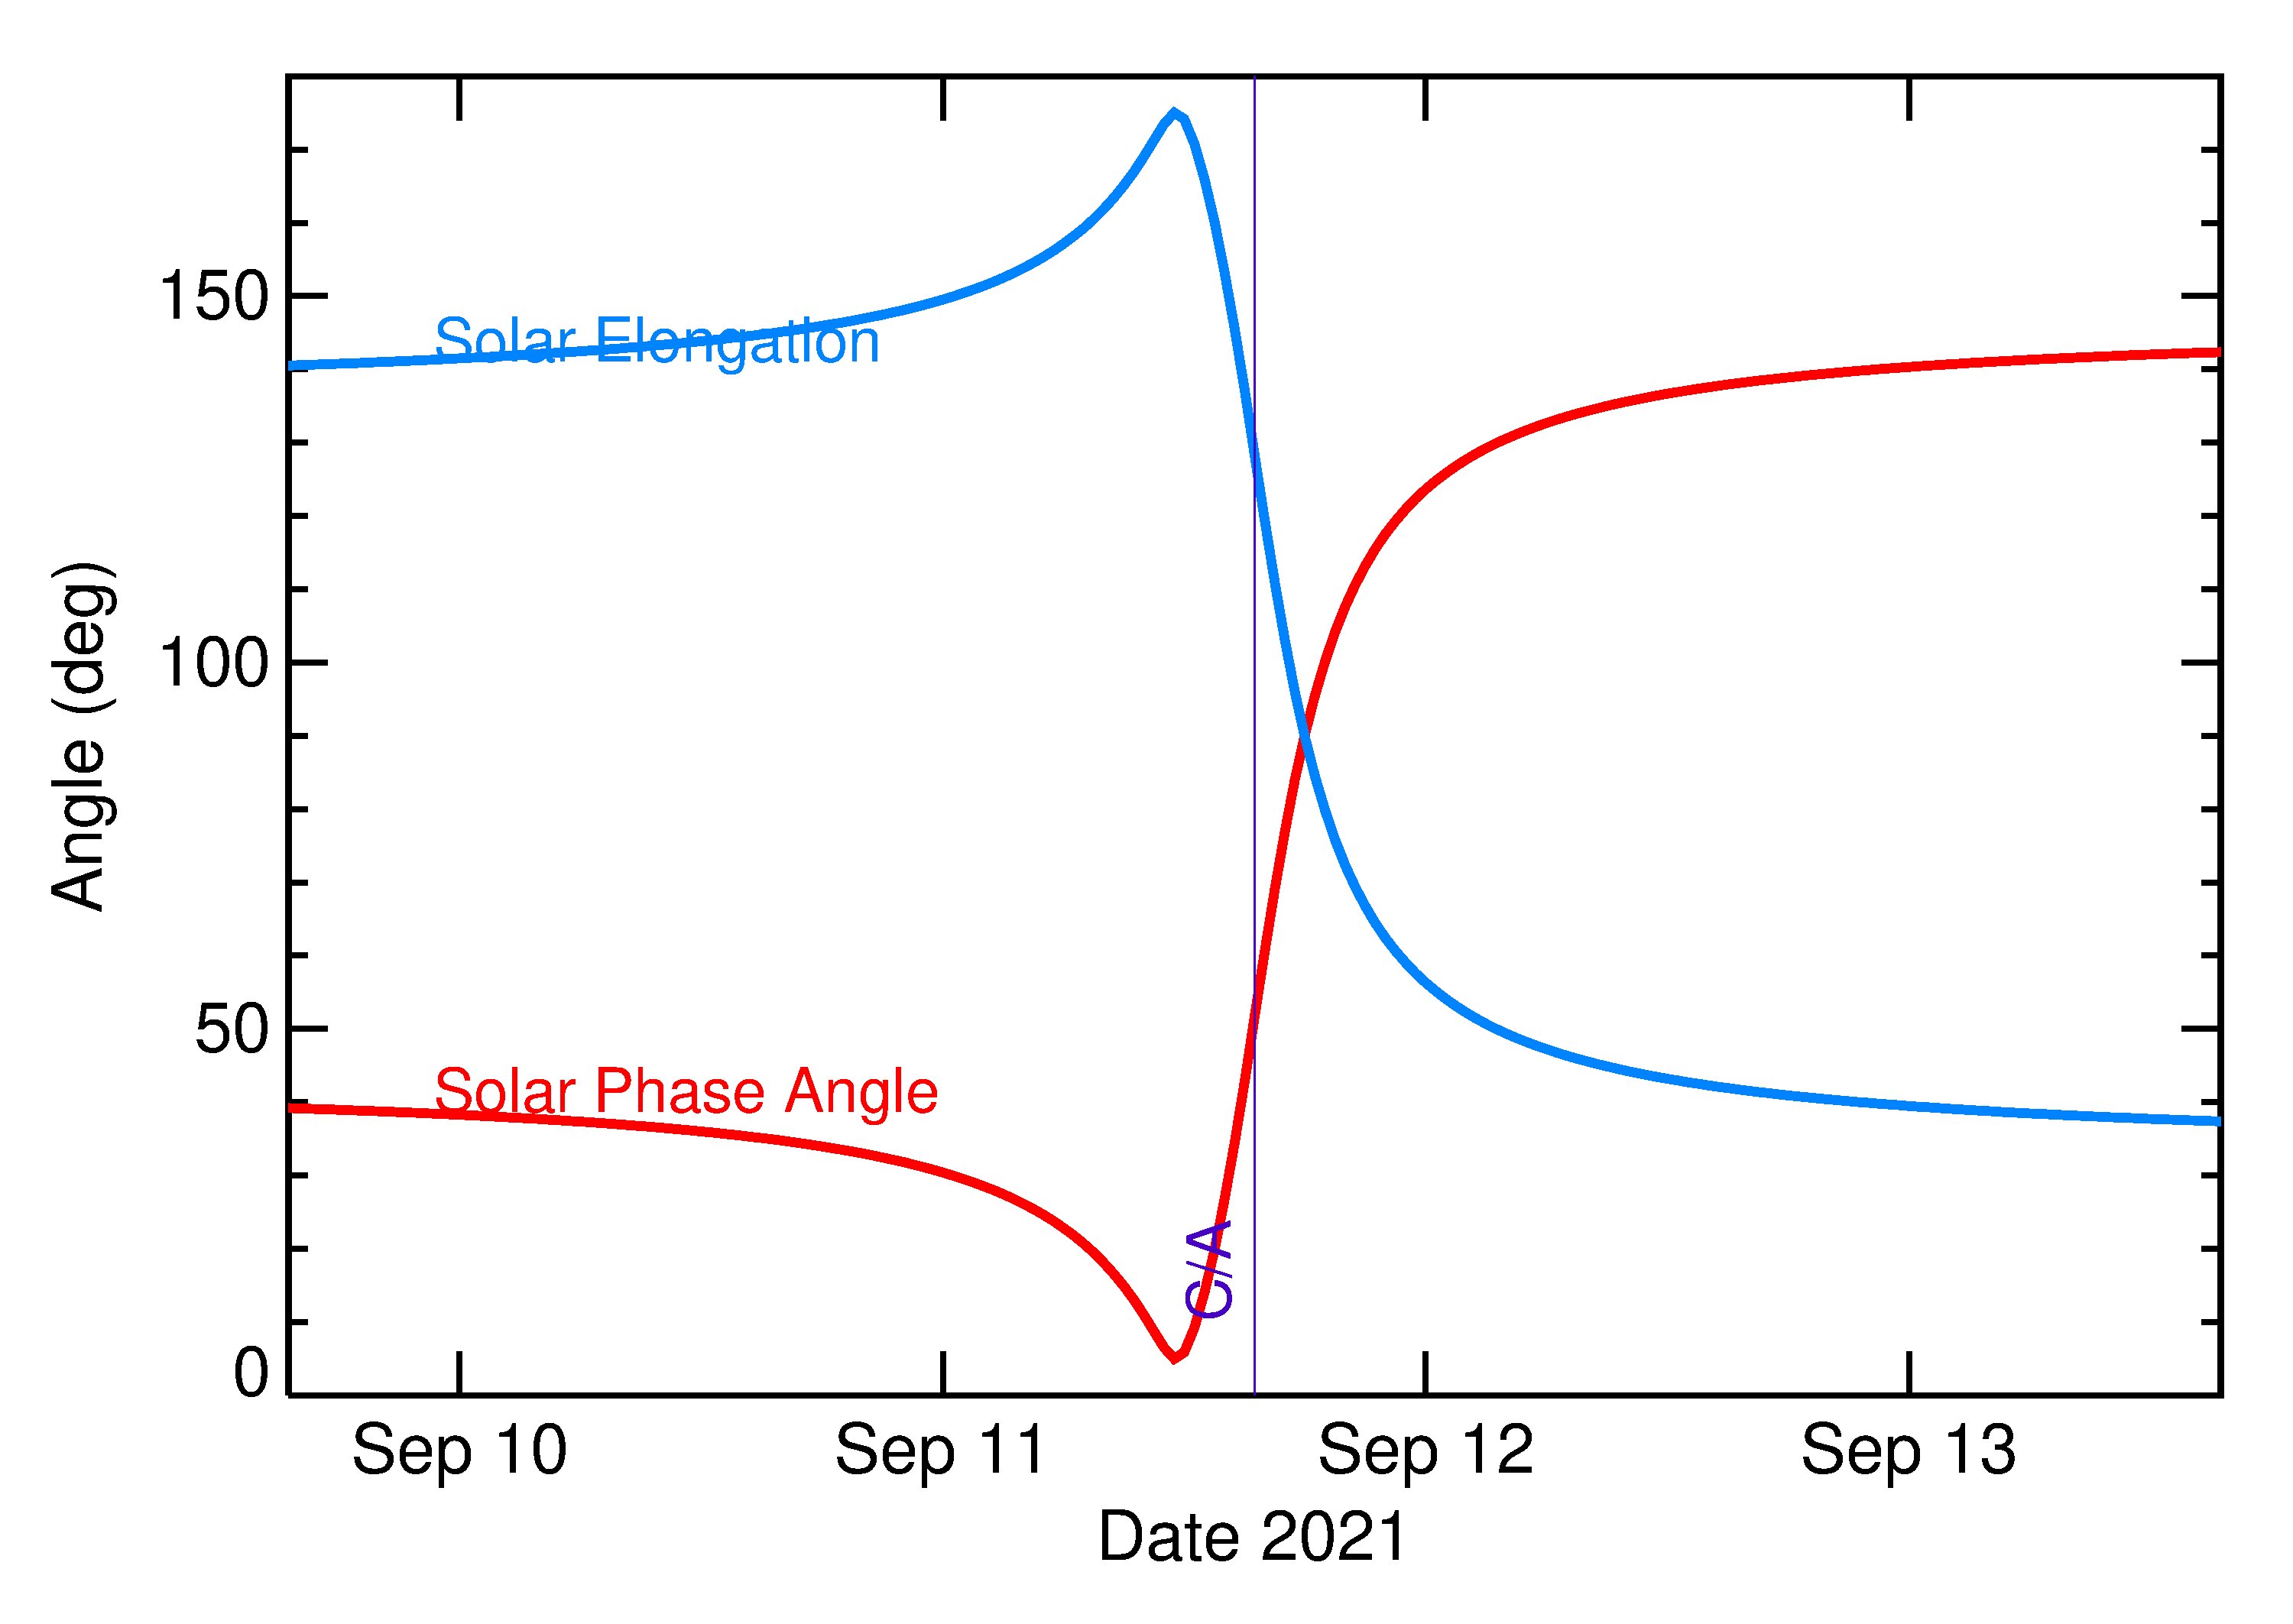 Solar Elongation and Solar Phase Angle of 2021 RG6 in the days around closest approach